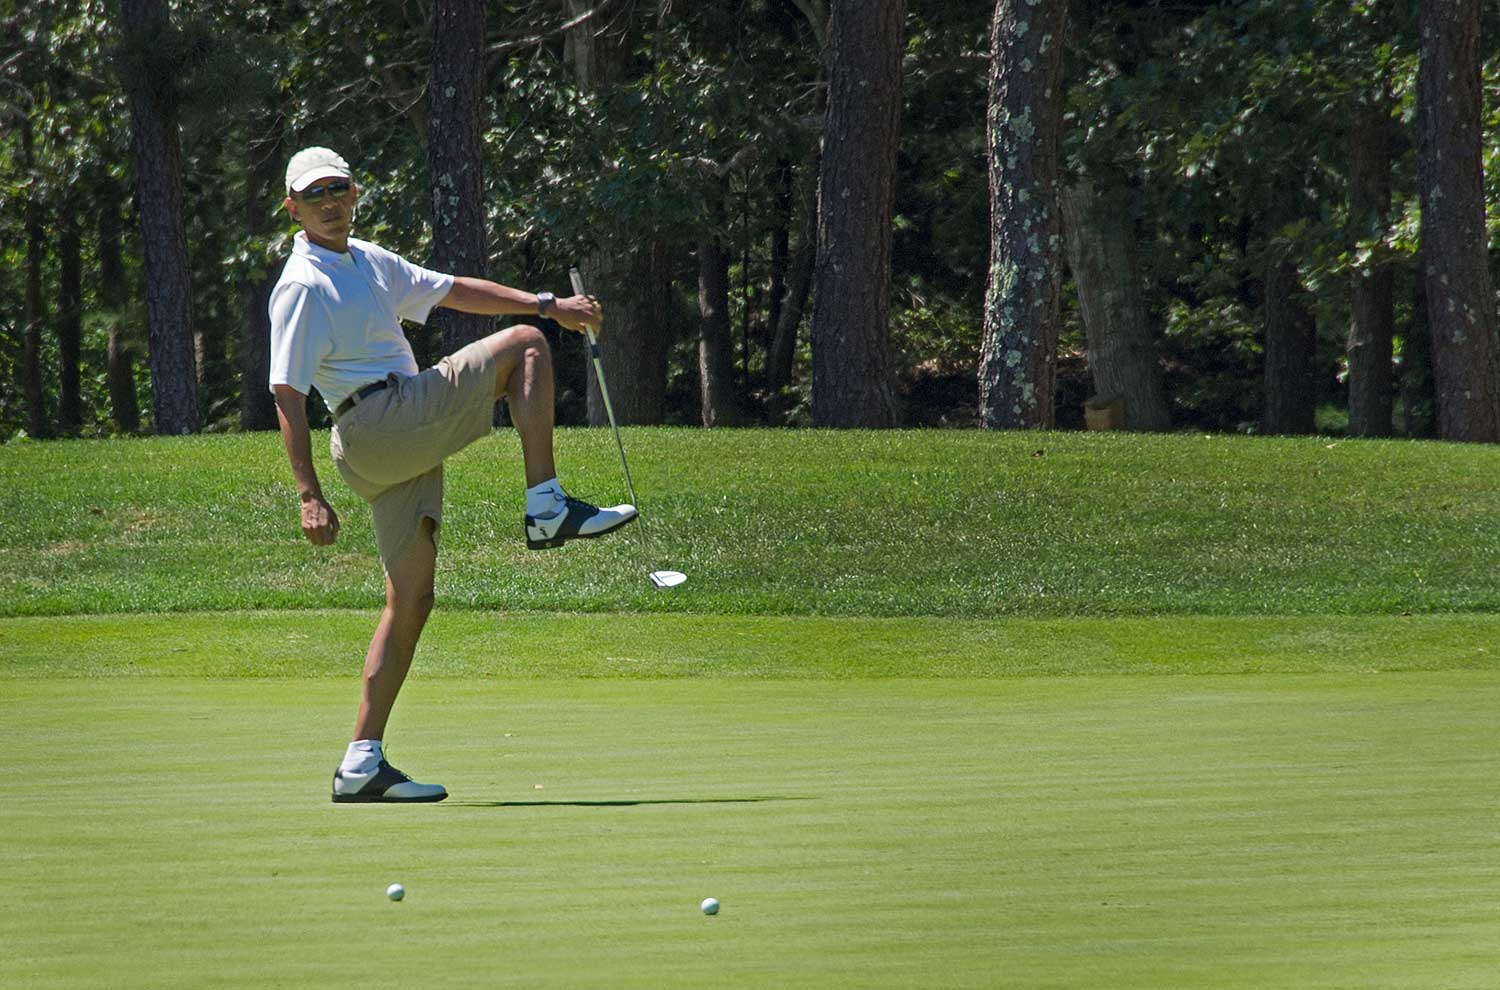 US President Barack Obama reacts to a missed putt on the first green at Farm Neck Golf Club in Oak Bluffs, Mass. on August 11, 2013 during the Obama family vacation to Martha's Vineyard.